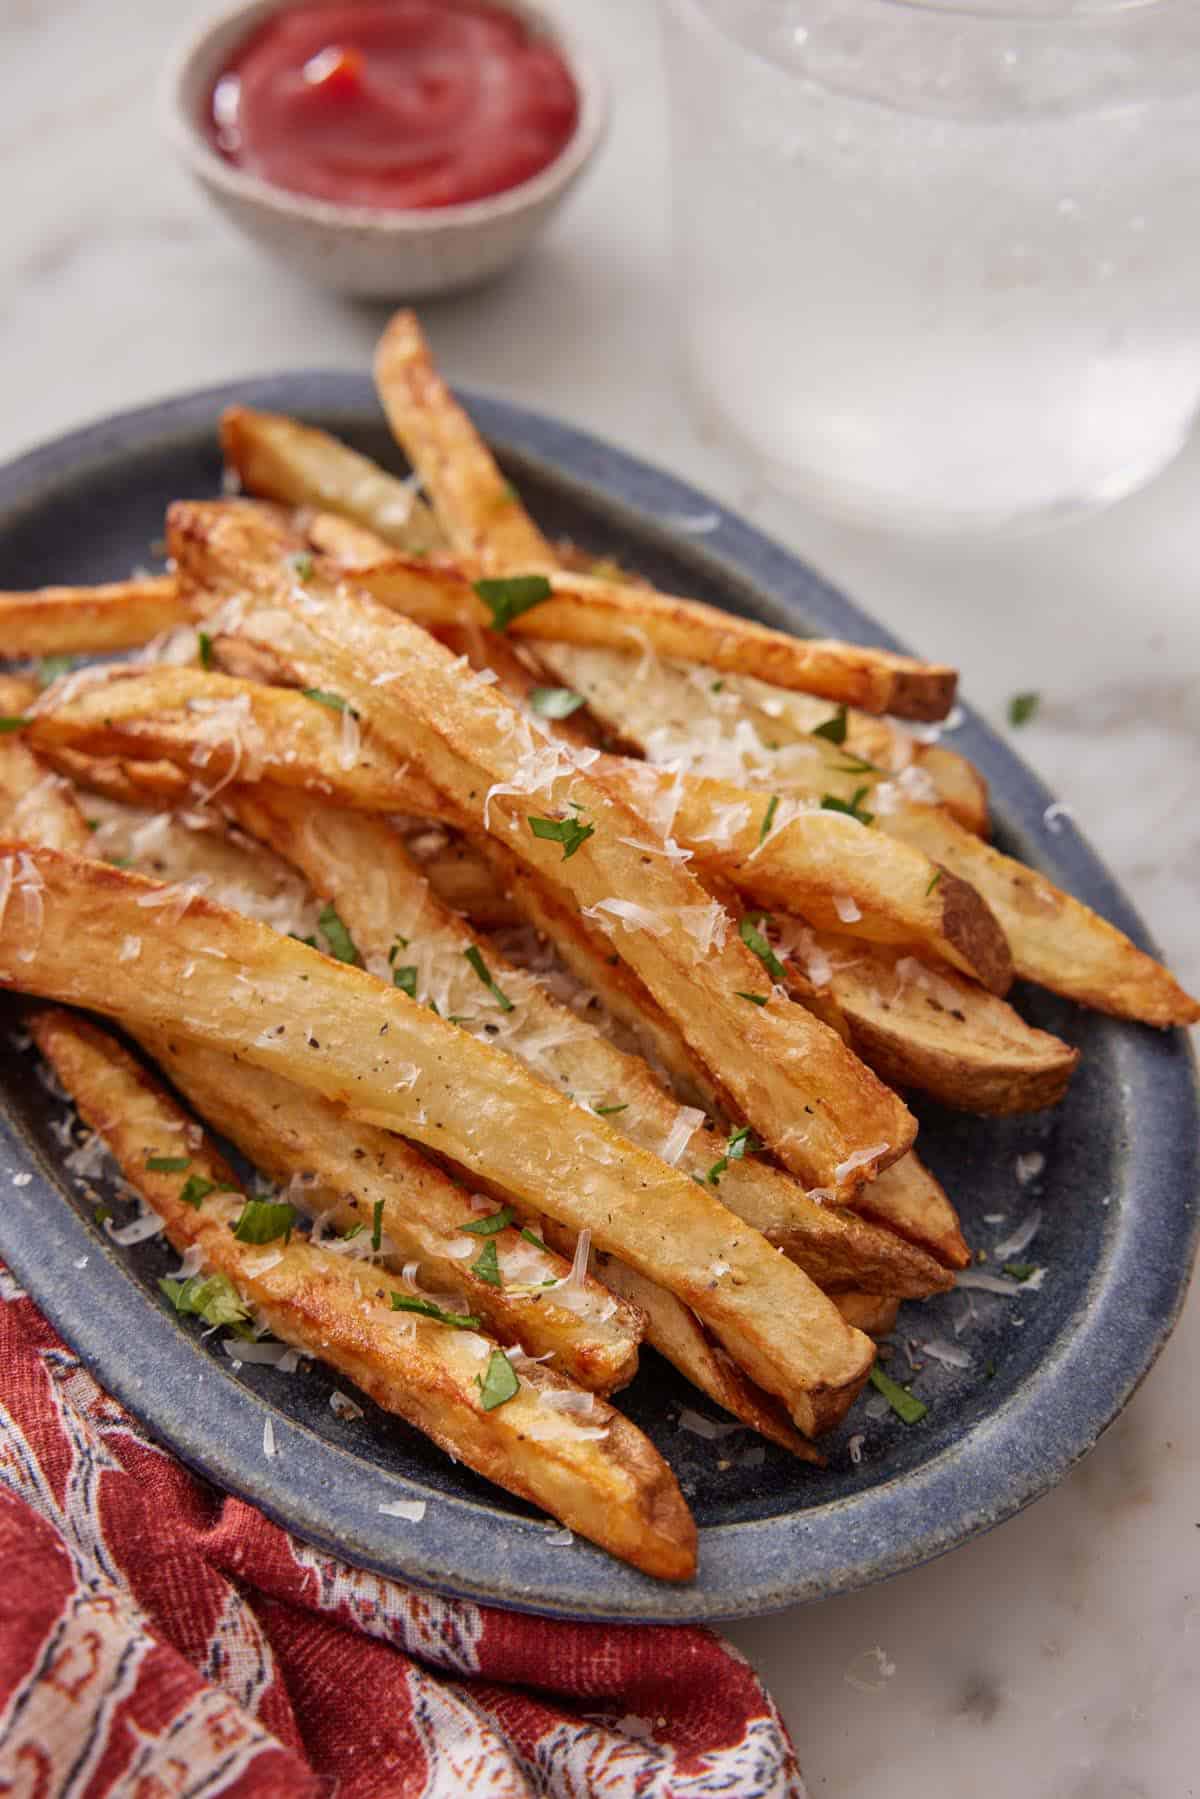 A plate with air fryer french fries garnished with parsley and parmesan.